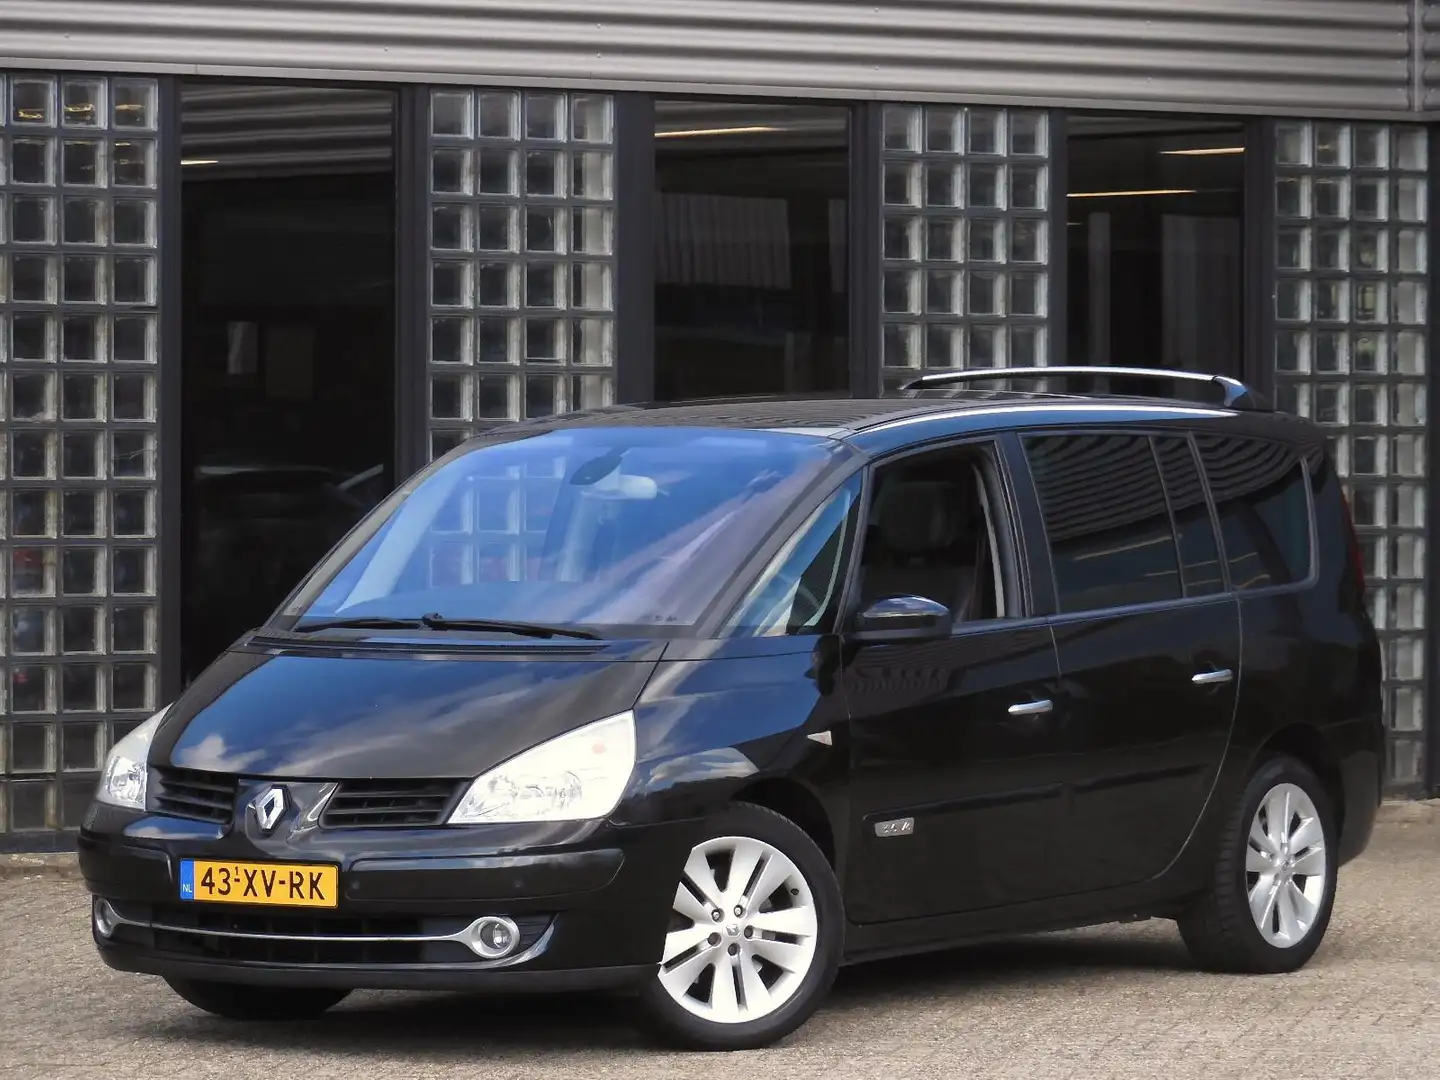 Renault Grand Espace 3.5 V6 7-PERSOONS/ PANORAMADAK/ PDC V+A Negro - 2